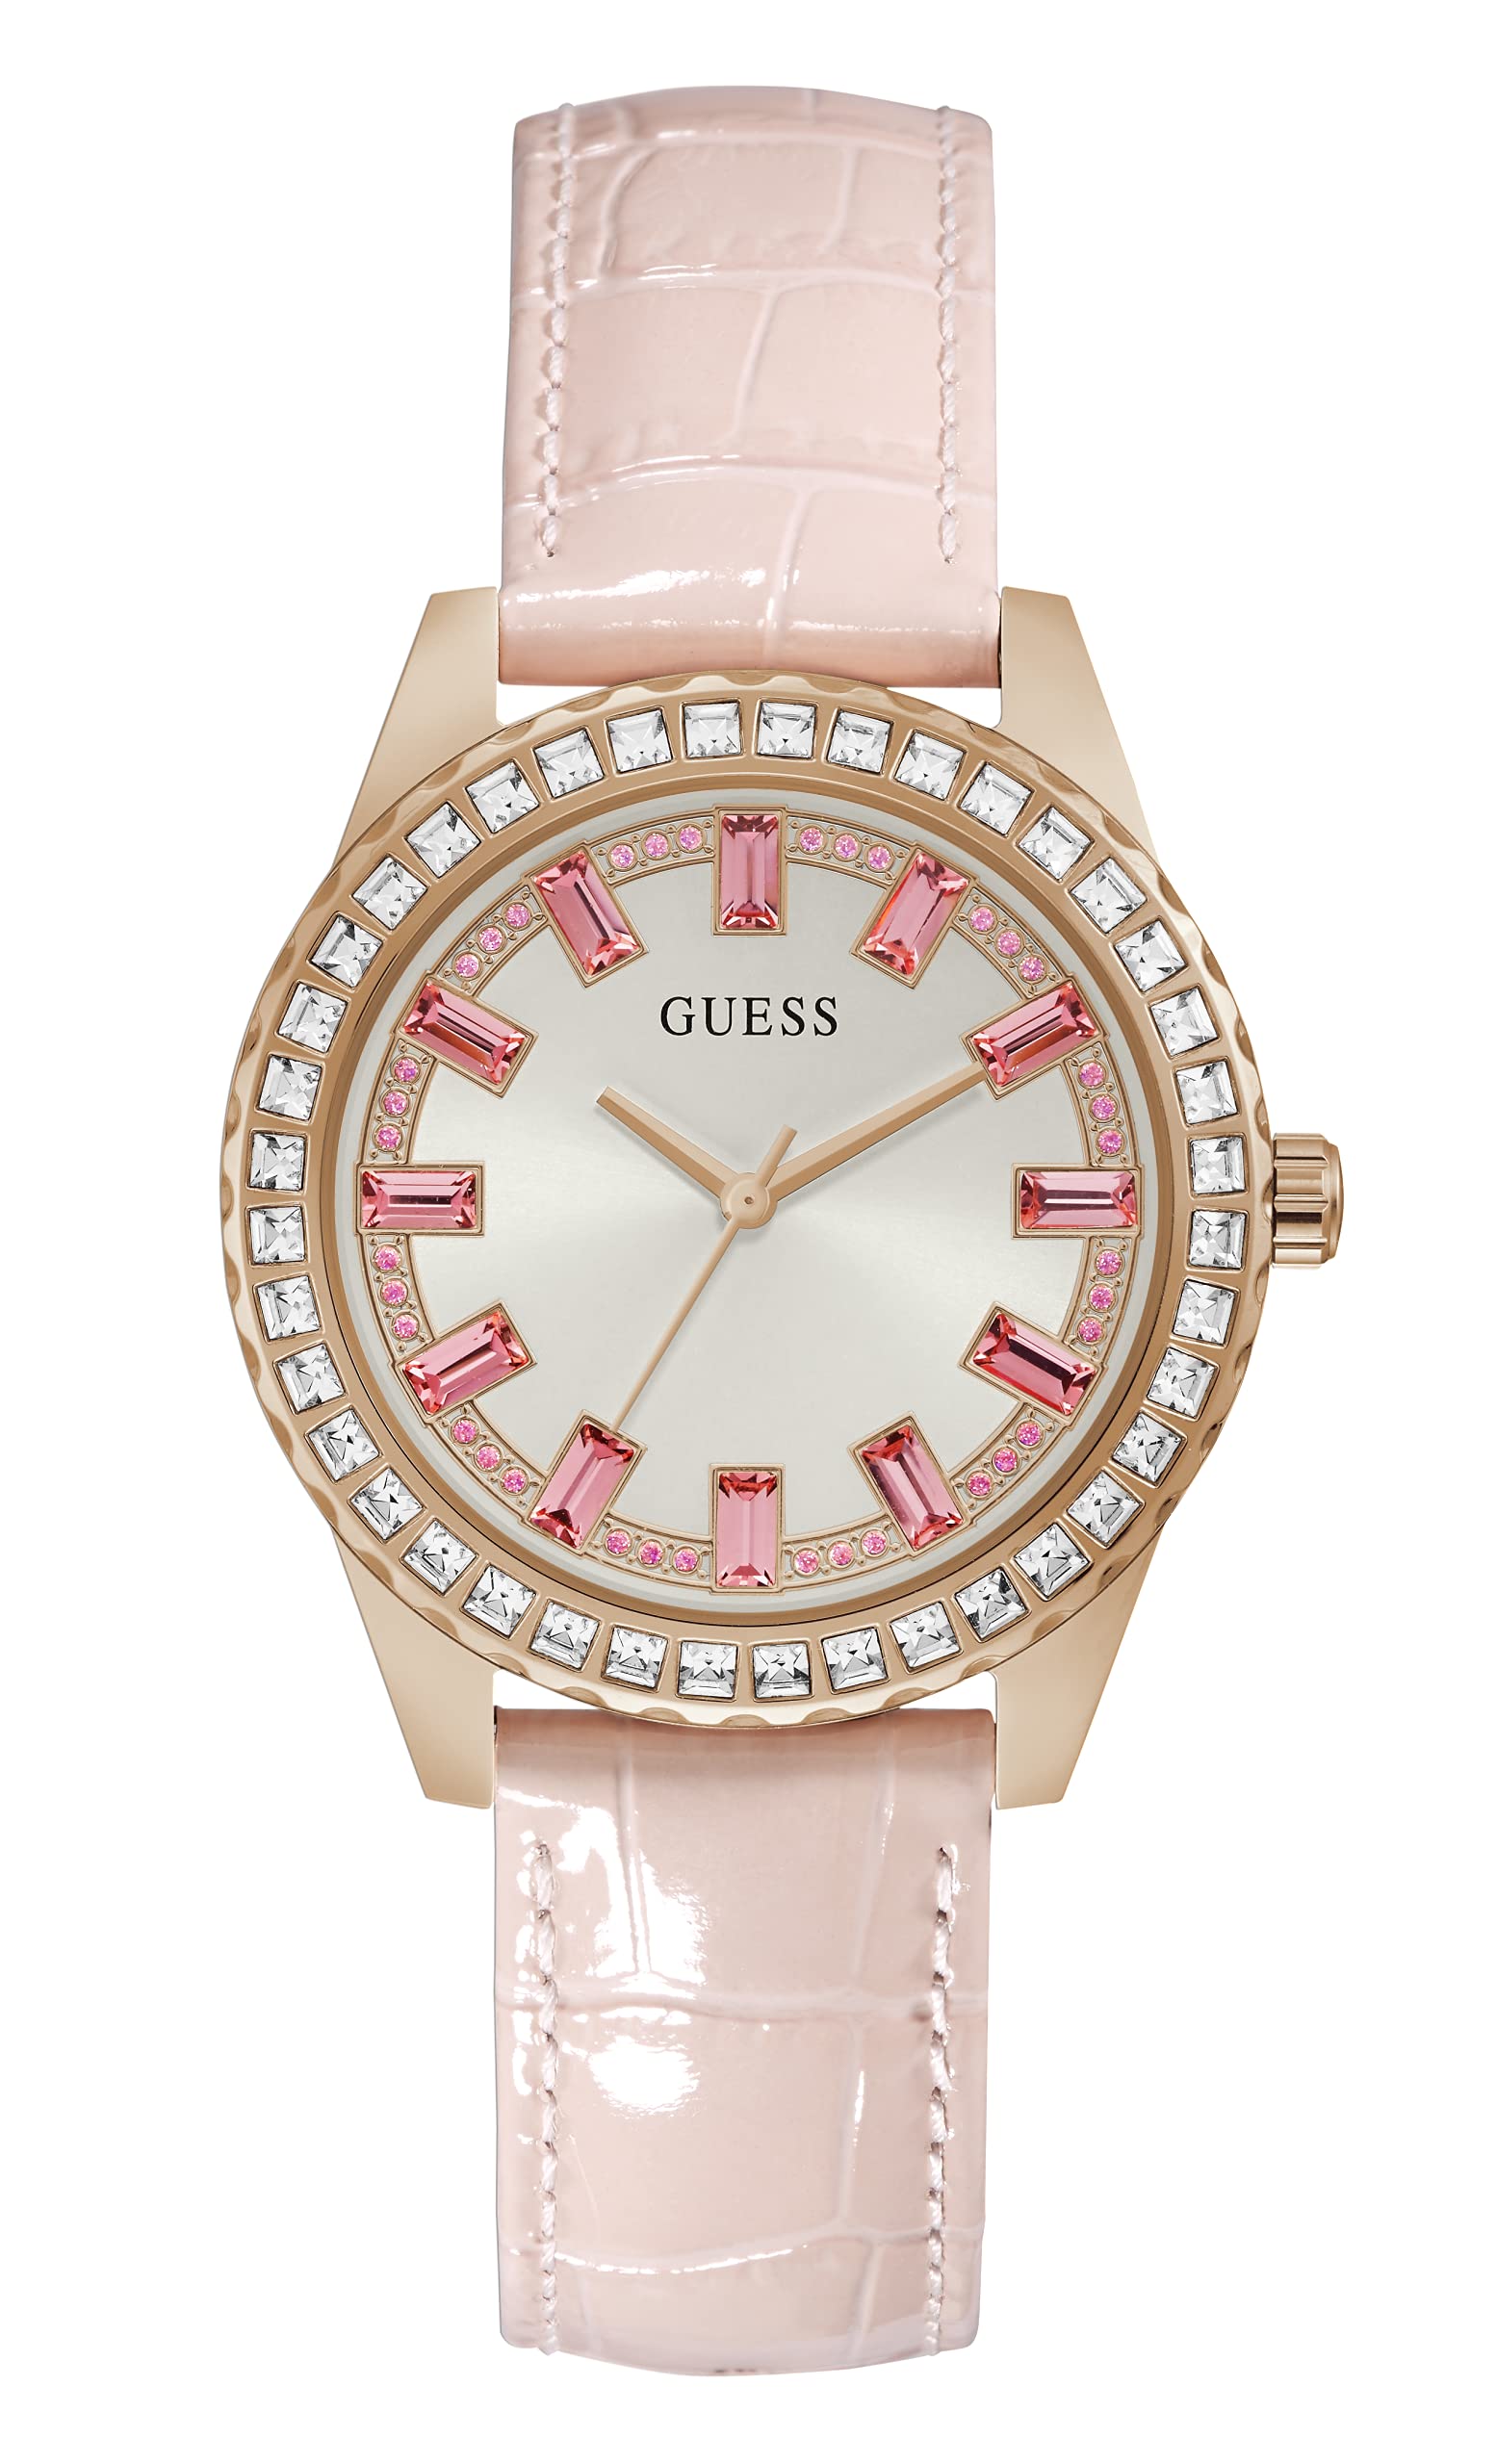 GUESS Genuine Leather Crystal Watch